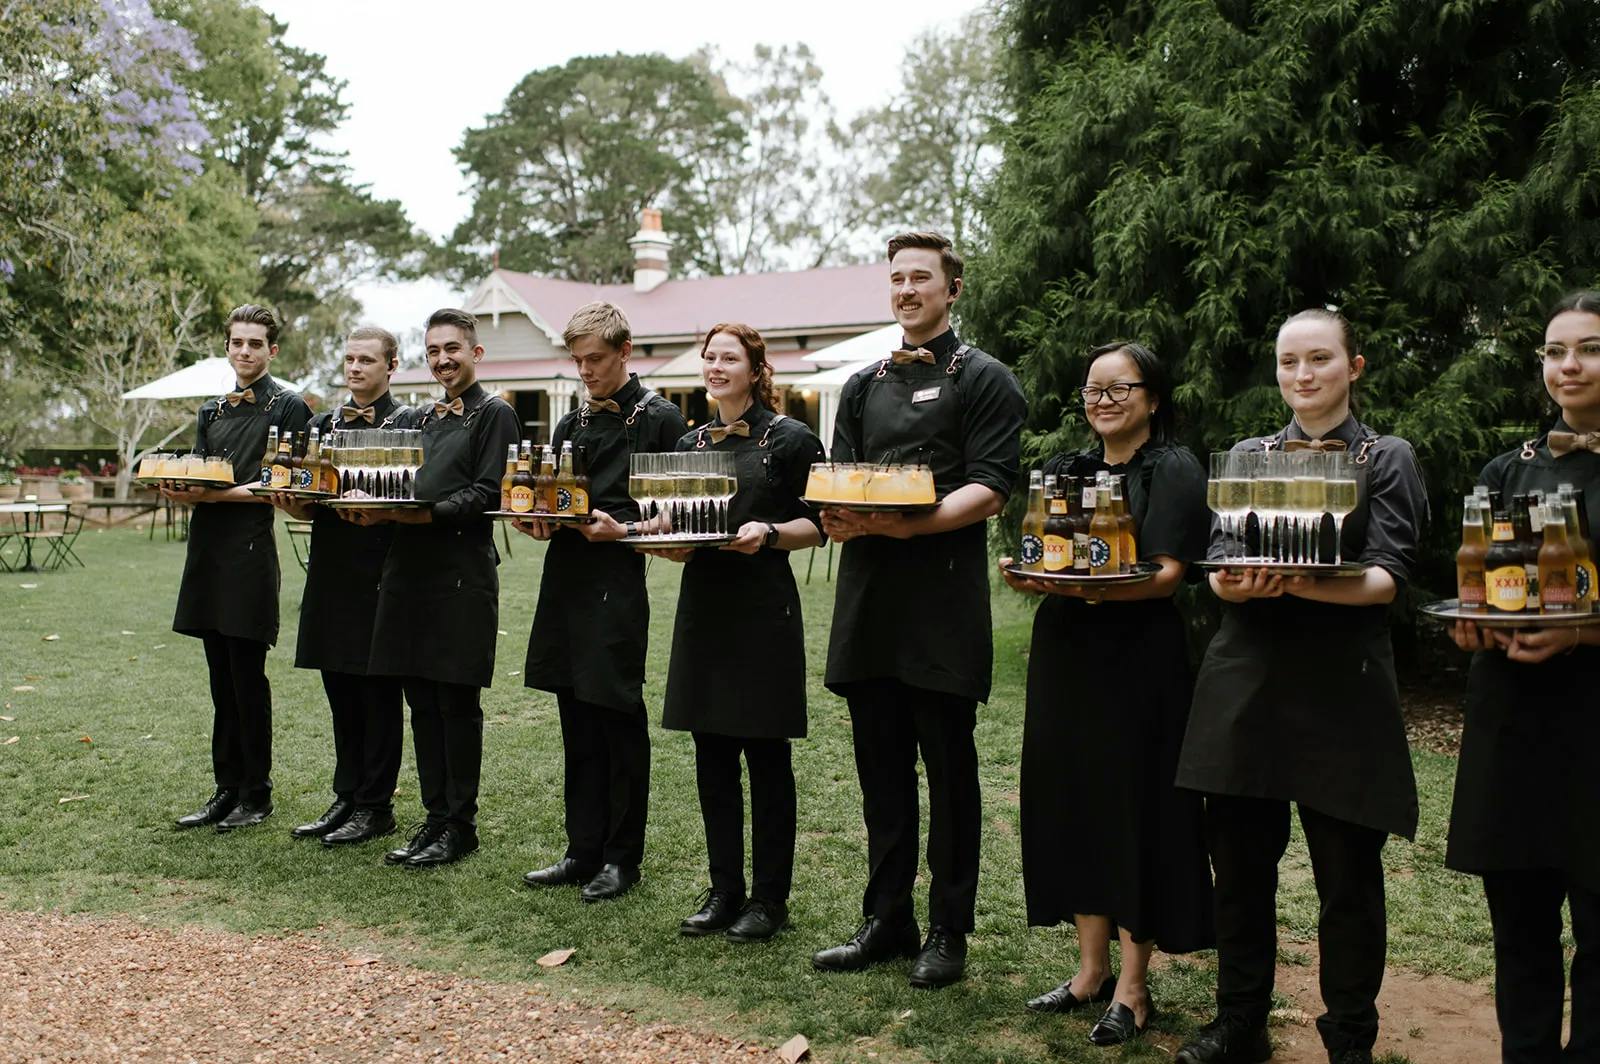 A group of nine servers, dressed in black uniforms, stand outdoors in a line holding trays with drinks and desserts. Behind them is a garden setting with trees, grass, and a building with a red roof. The atmosphere appears to be festive.